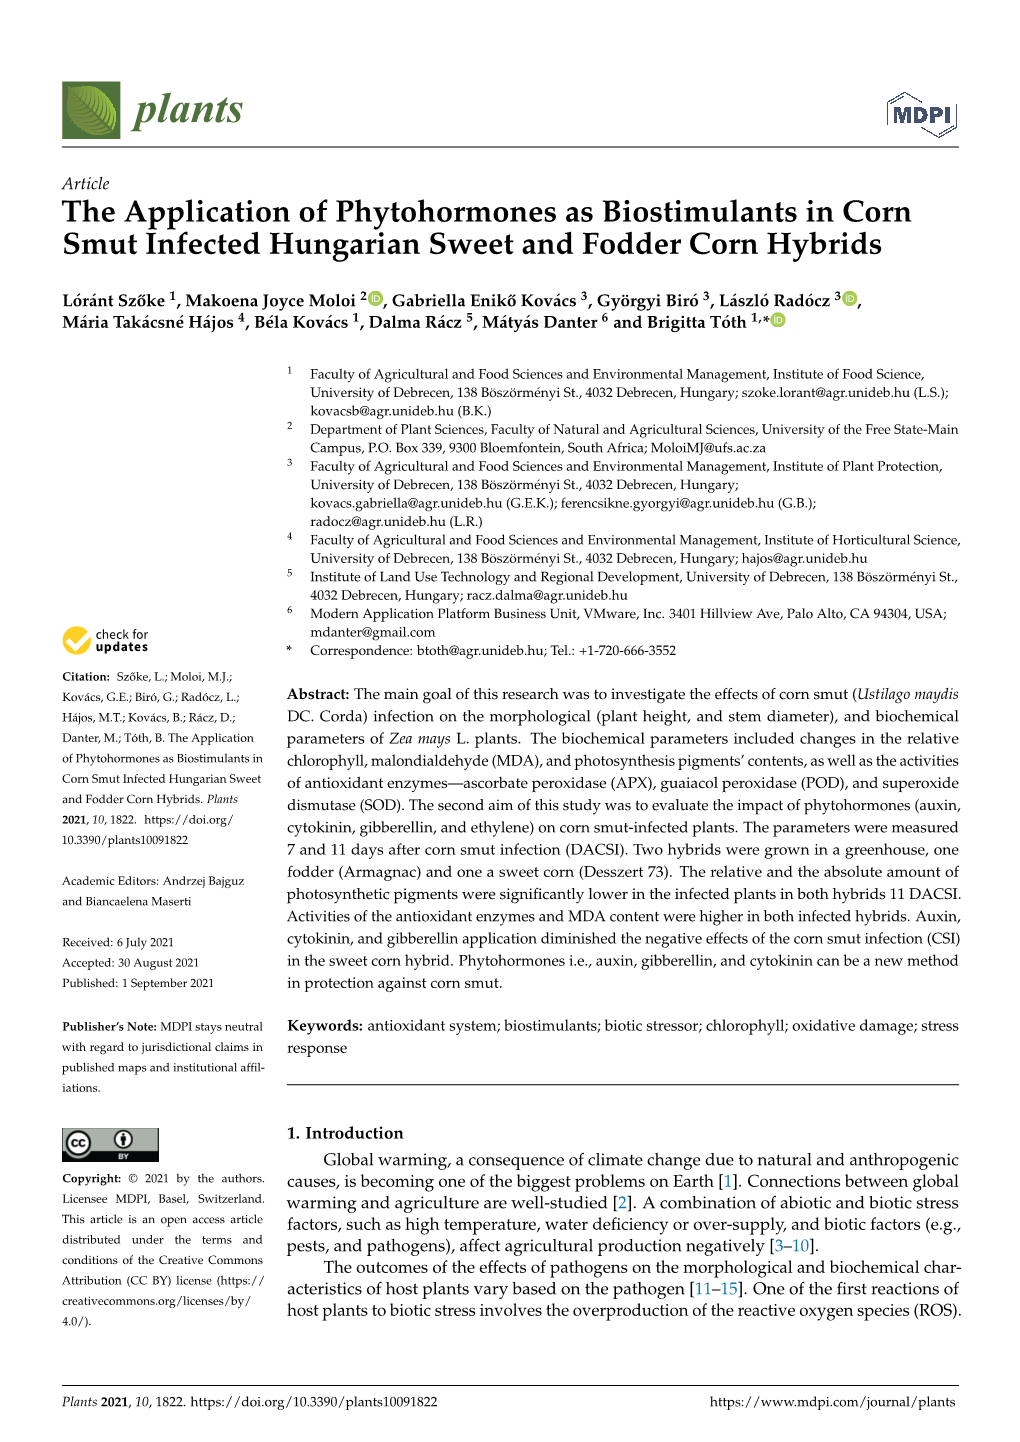 The Application of Phytohormones As Biostimulants in Corn Smut Infected Hungarian Sweet and Fodder Corn Hybrids